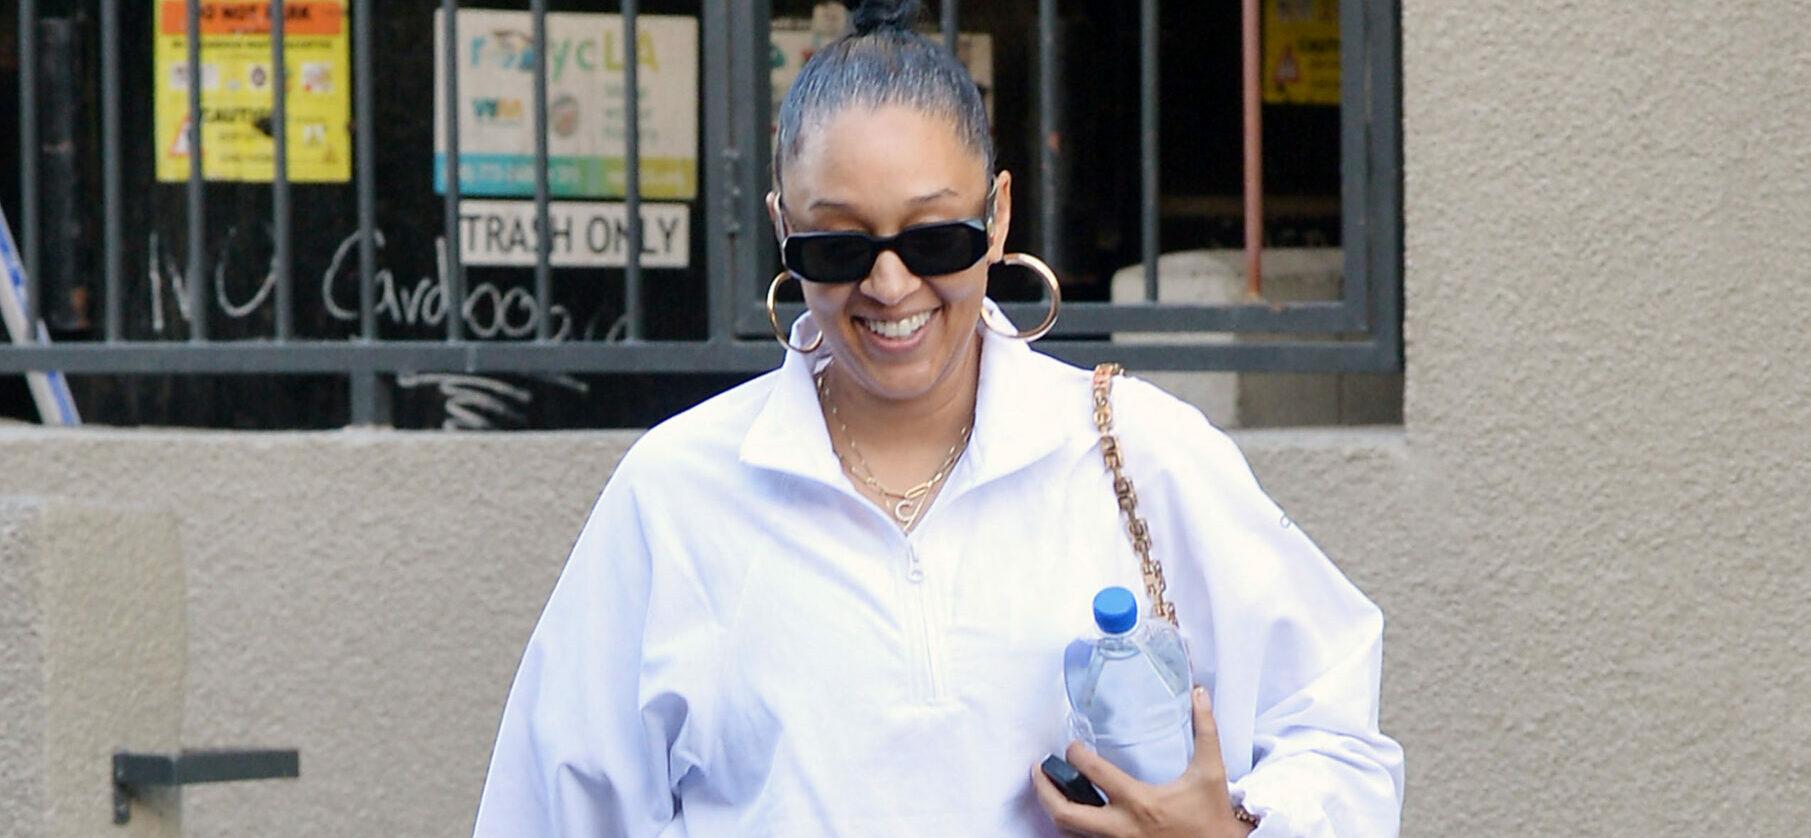 Tia Mowry is all smiles while showing off her fit body in a pair of yoga leggings while heading to the gym